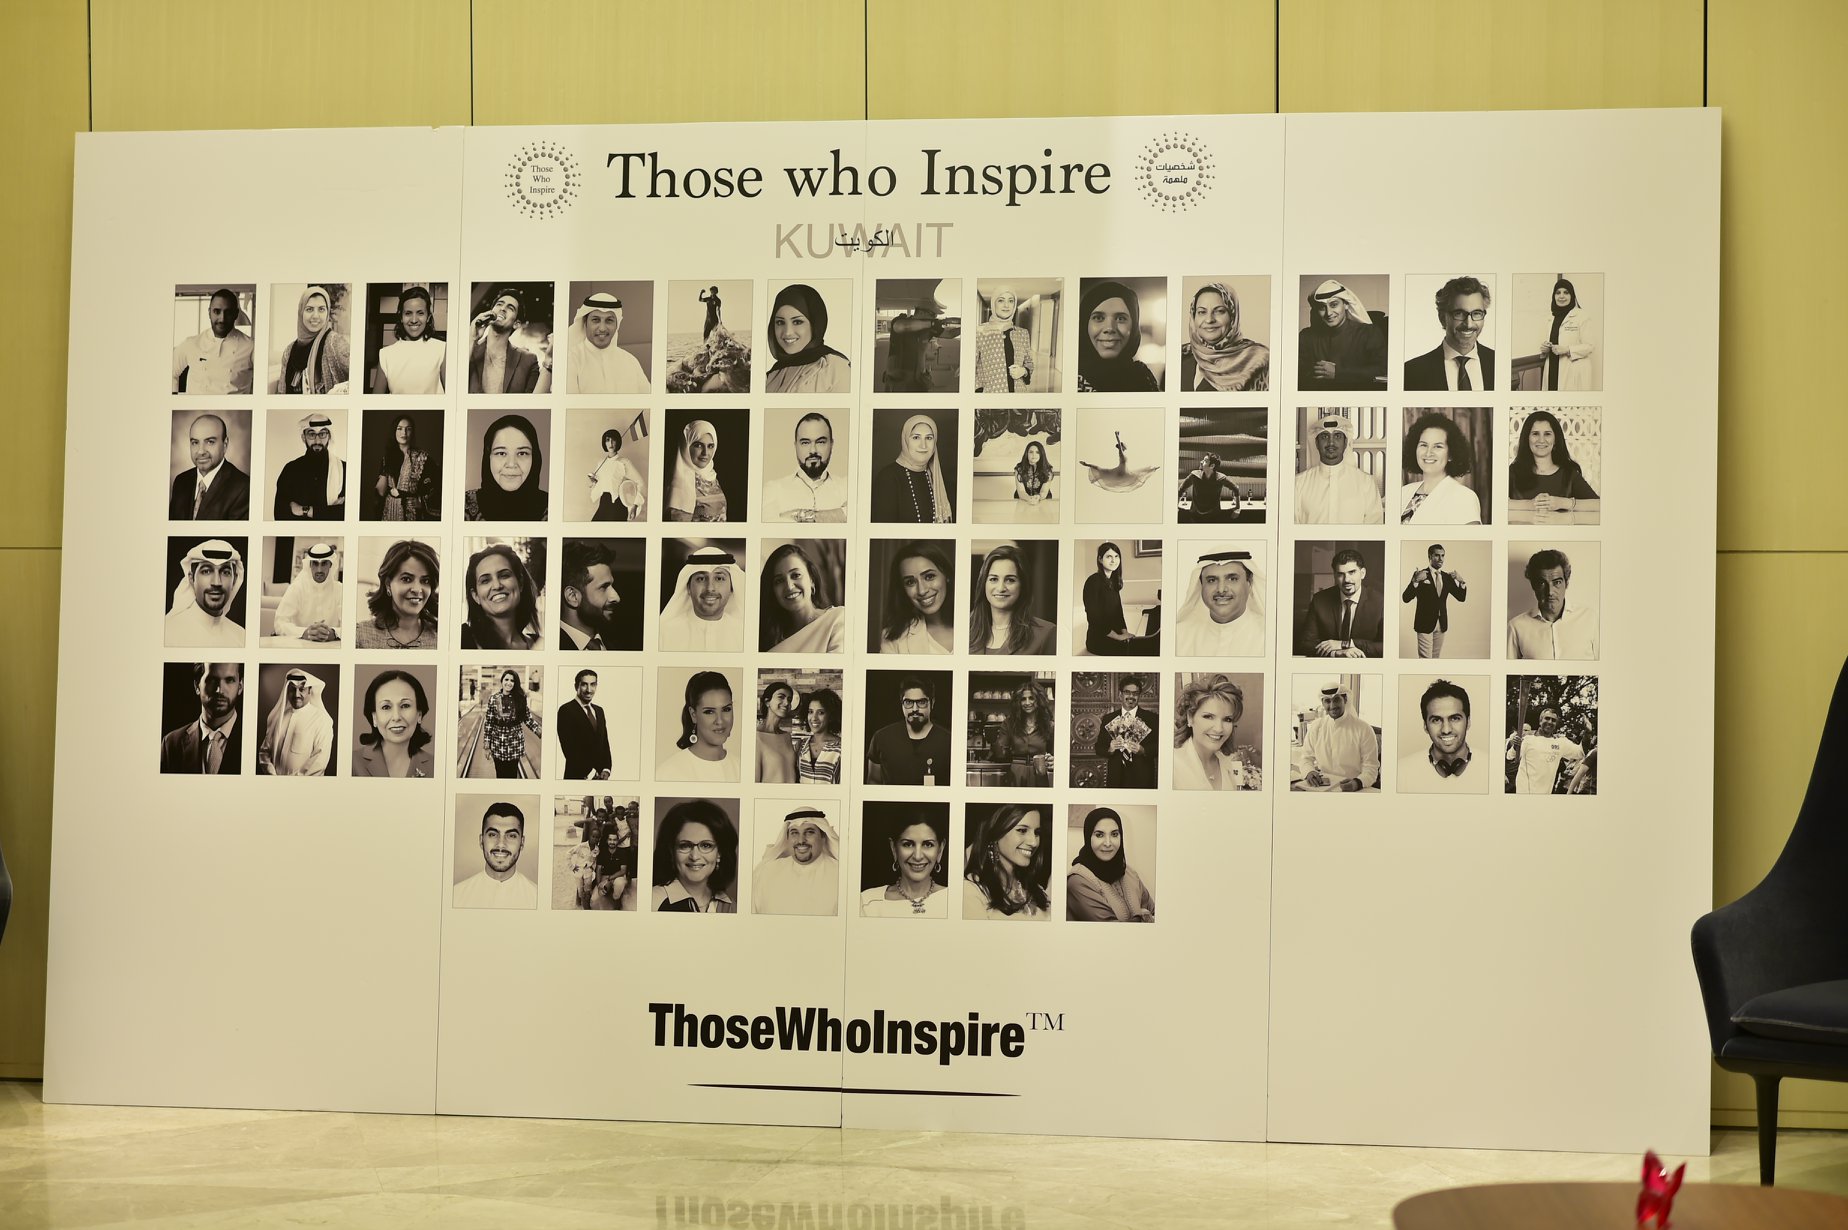 The 63 Inspiring Kuwaitis displayed on a big backdrop for the book launch ©Those Who Inspire